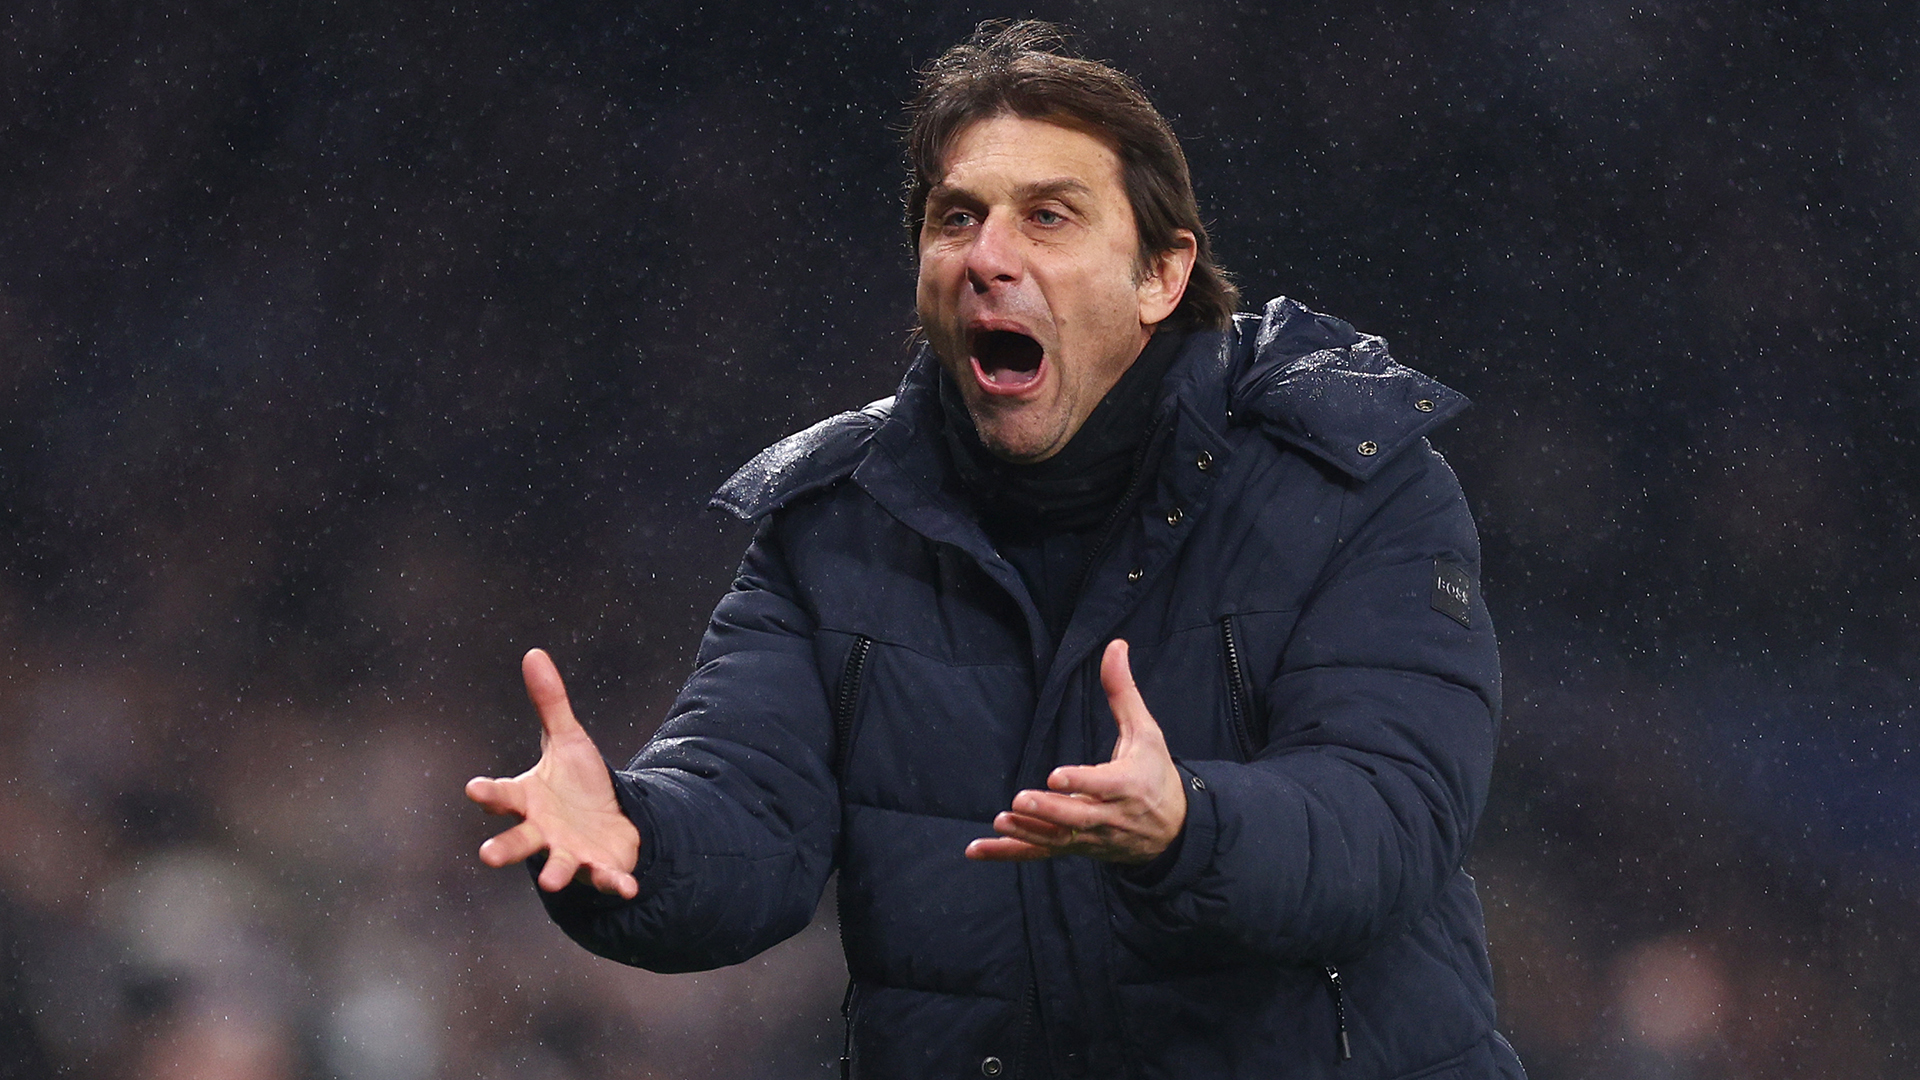 Antonio Conte, Manager of Tottenham Hotspur, reacts during the UEFA Champions League round of 16 leg two match between Tottenham Hotspur and AC Milan at Tottenham Hotspur Stadium on March 08, 2023 in London, England